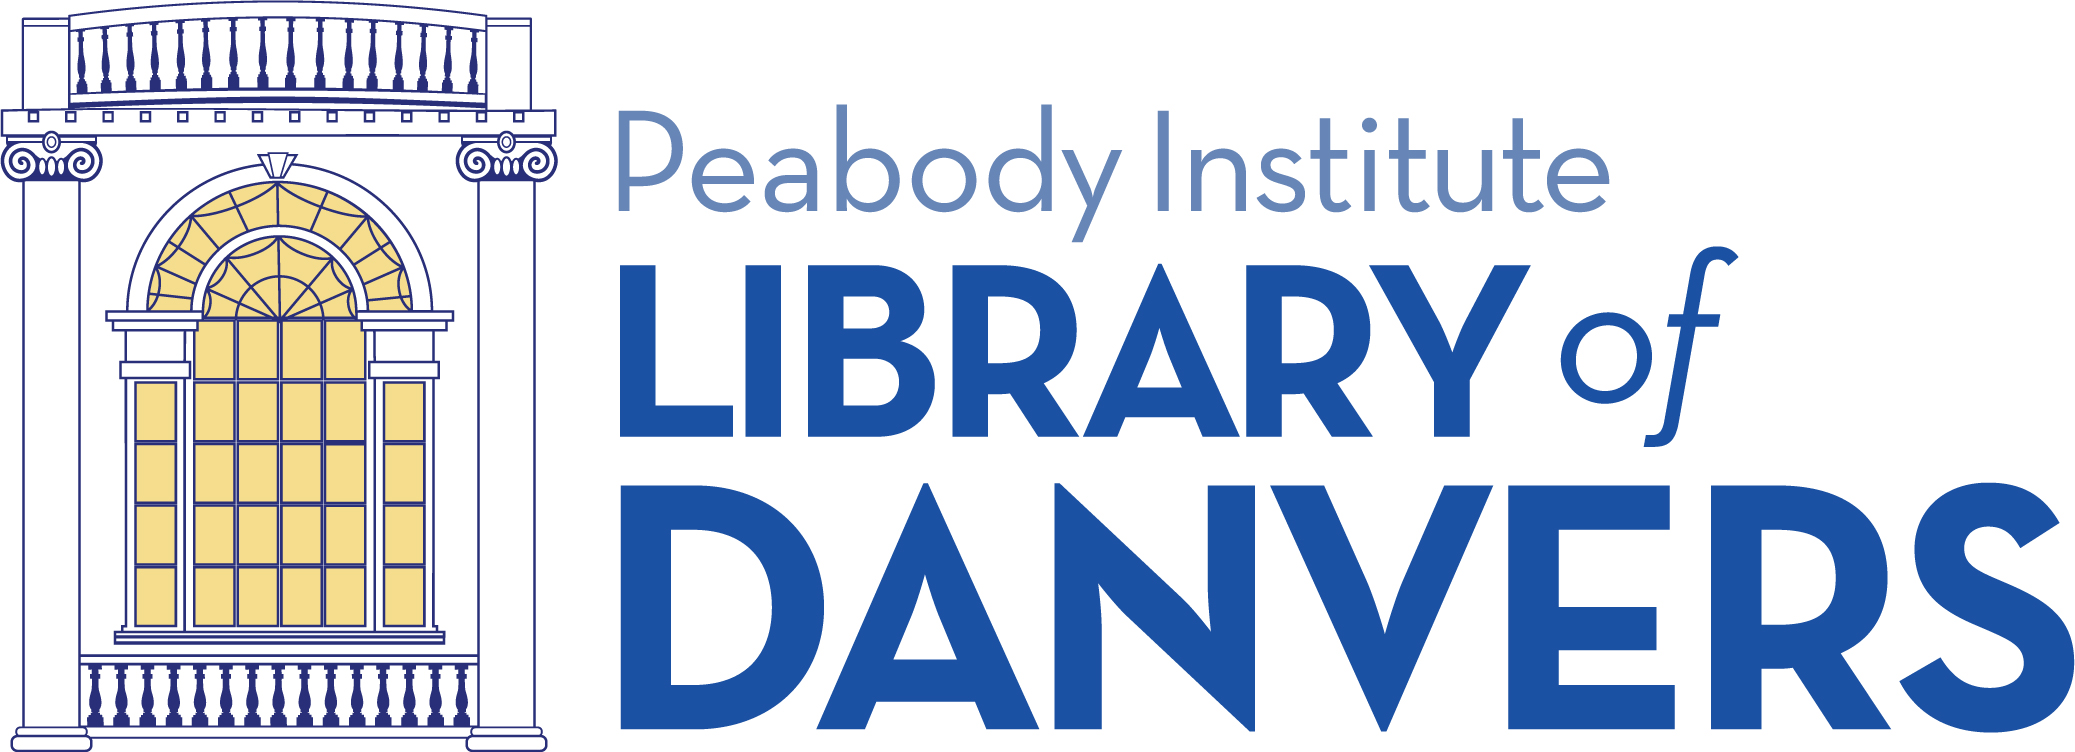 Peabody Institute Library of Danvers, MA - web logo